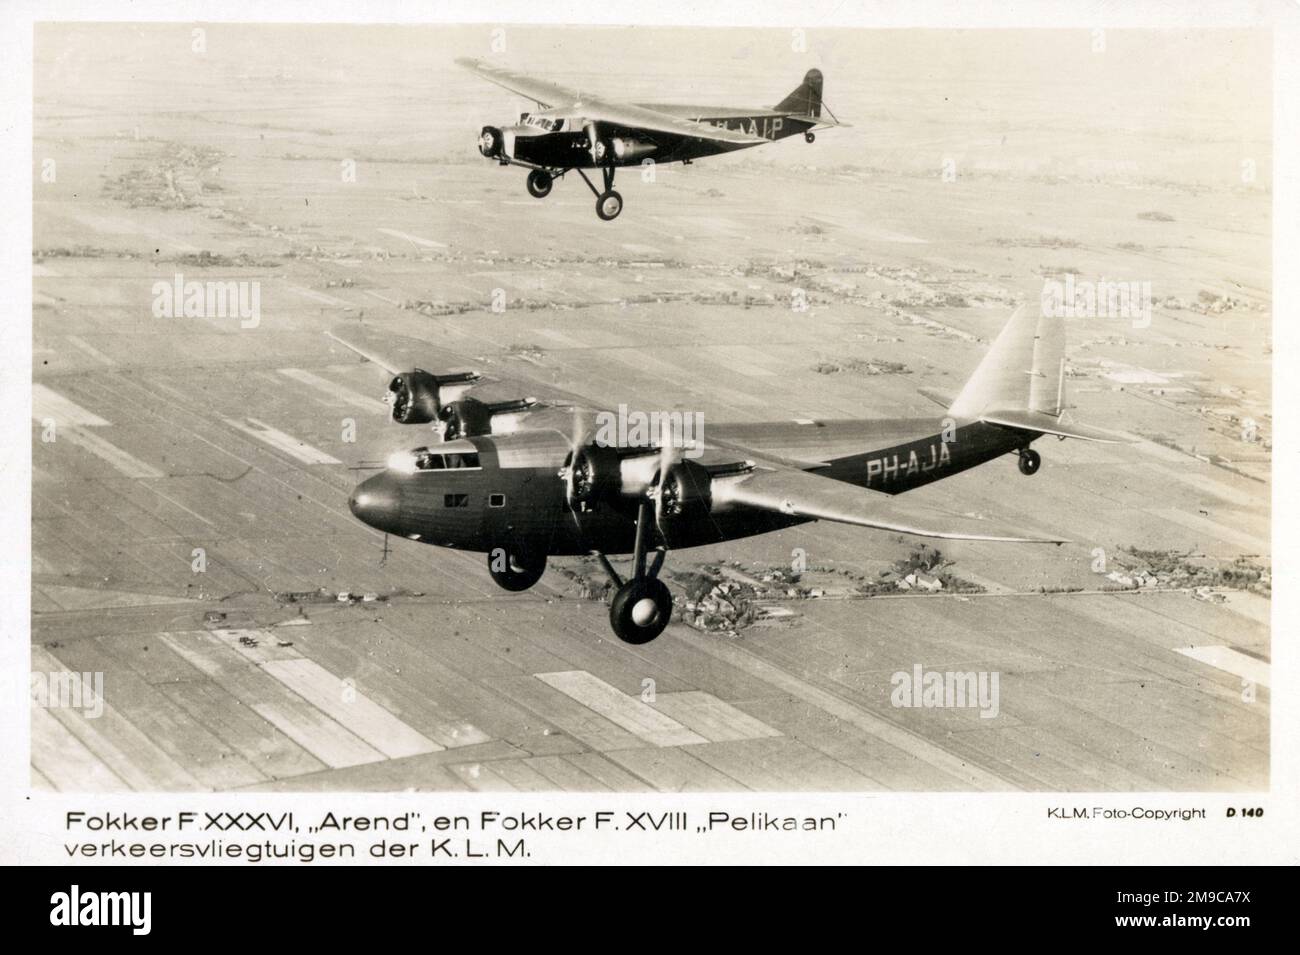 Fokker F.XXXVI 'Arend' (in front) and a Fokker F.XVIII 'Pelikaan' (behind) - Commercial Aircraft of KLM - only one F.XXXVI was ever built (first flight June 22, 1934), the aircraft had all-wood wings. Stock Photo